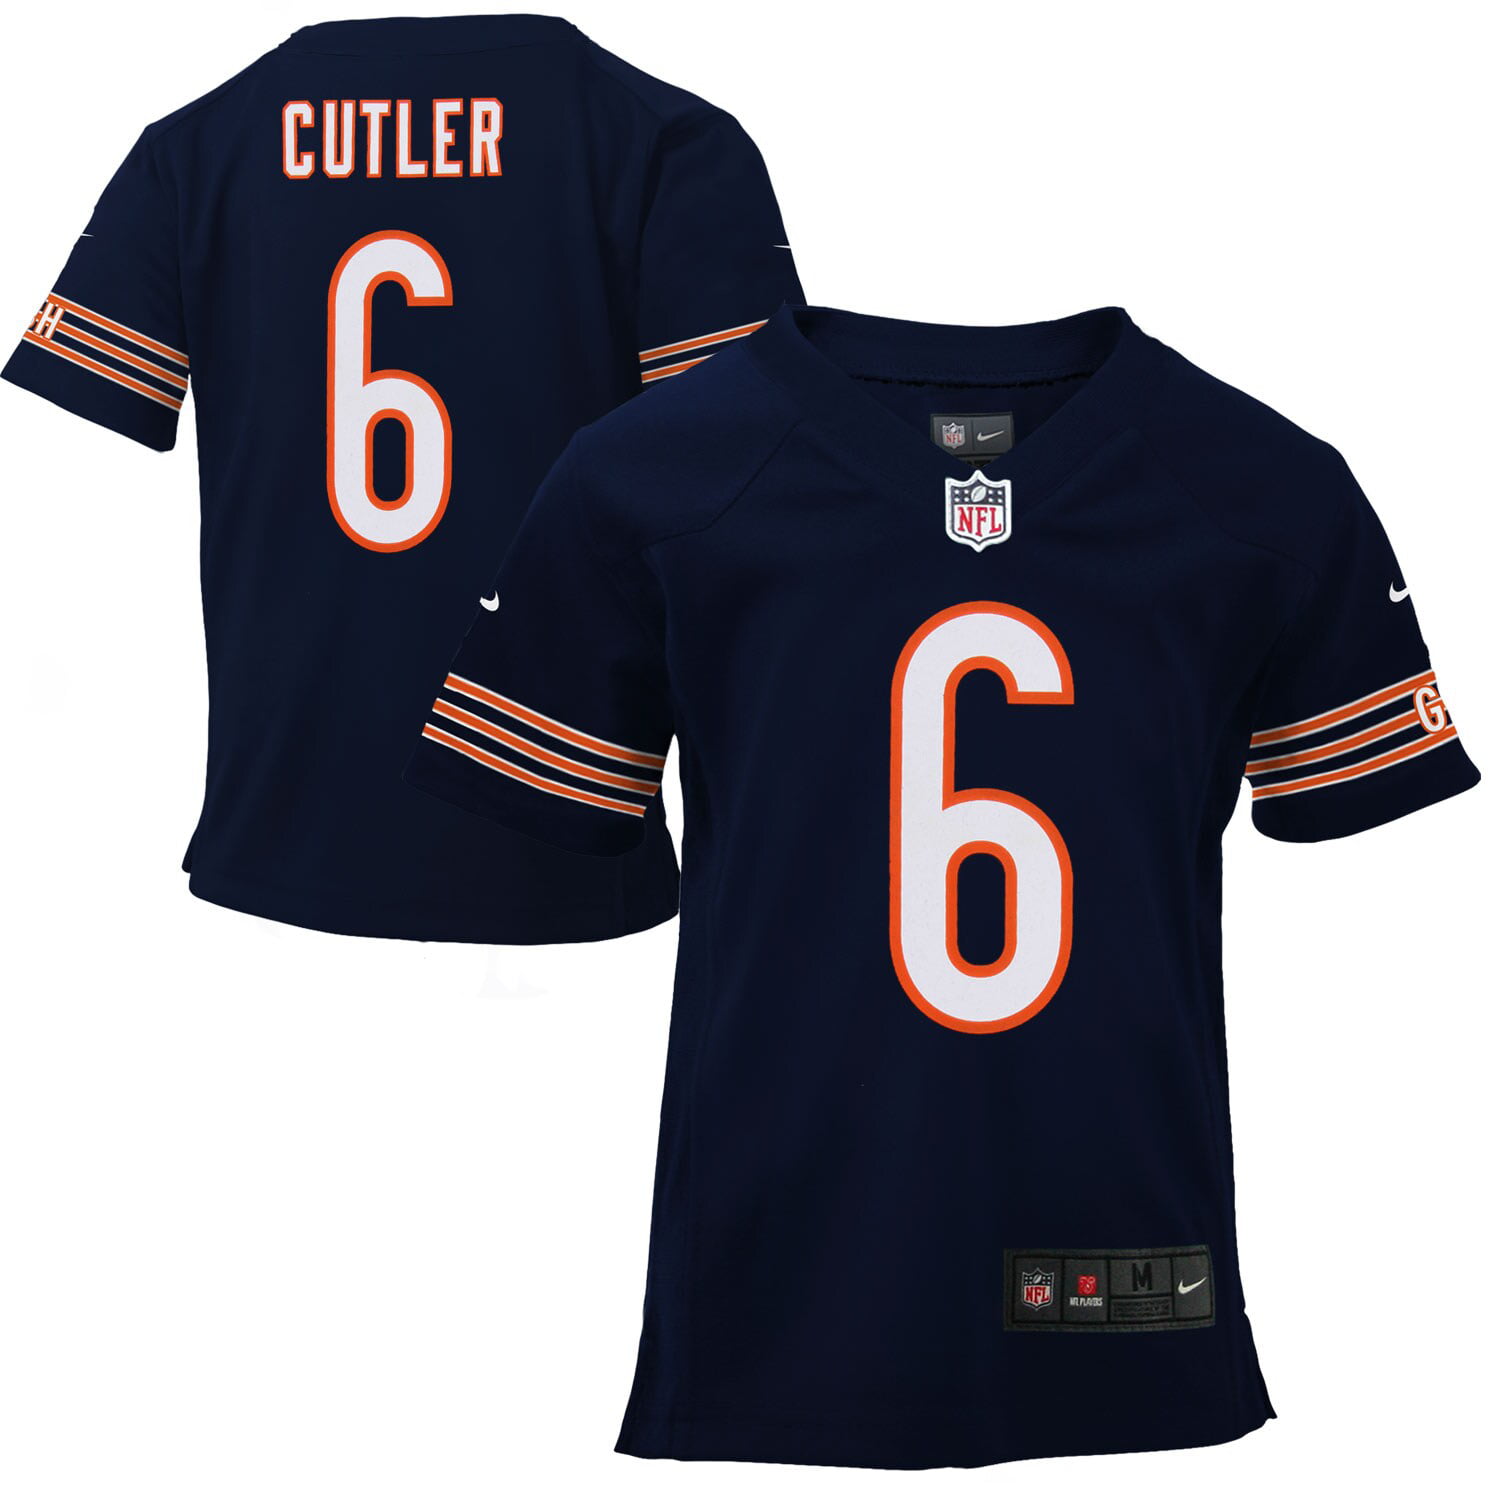 2t chicago bears jersey